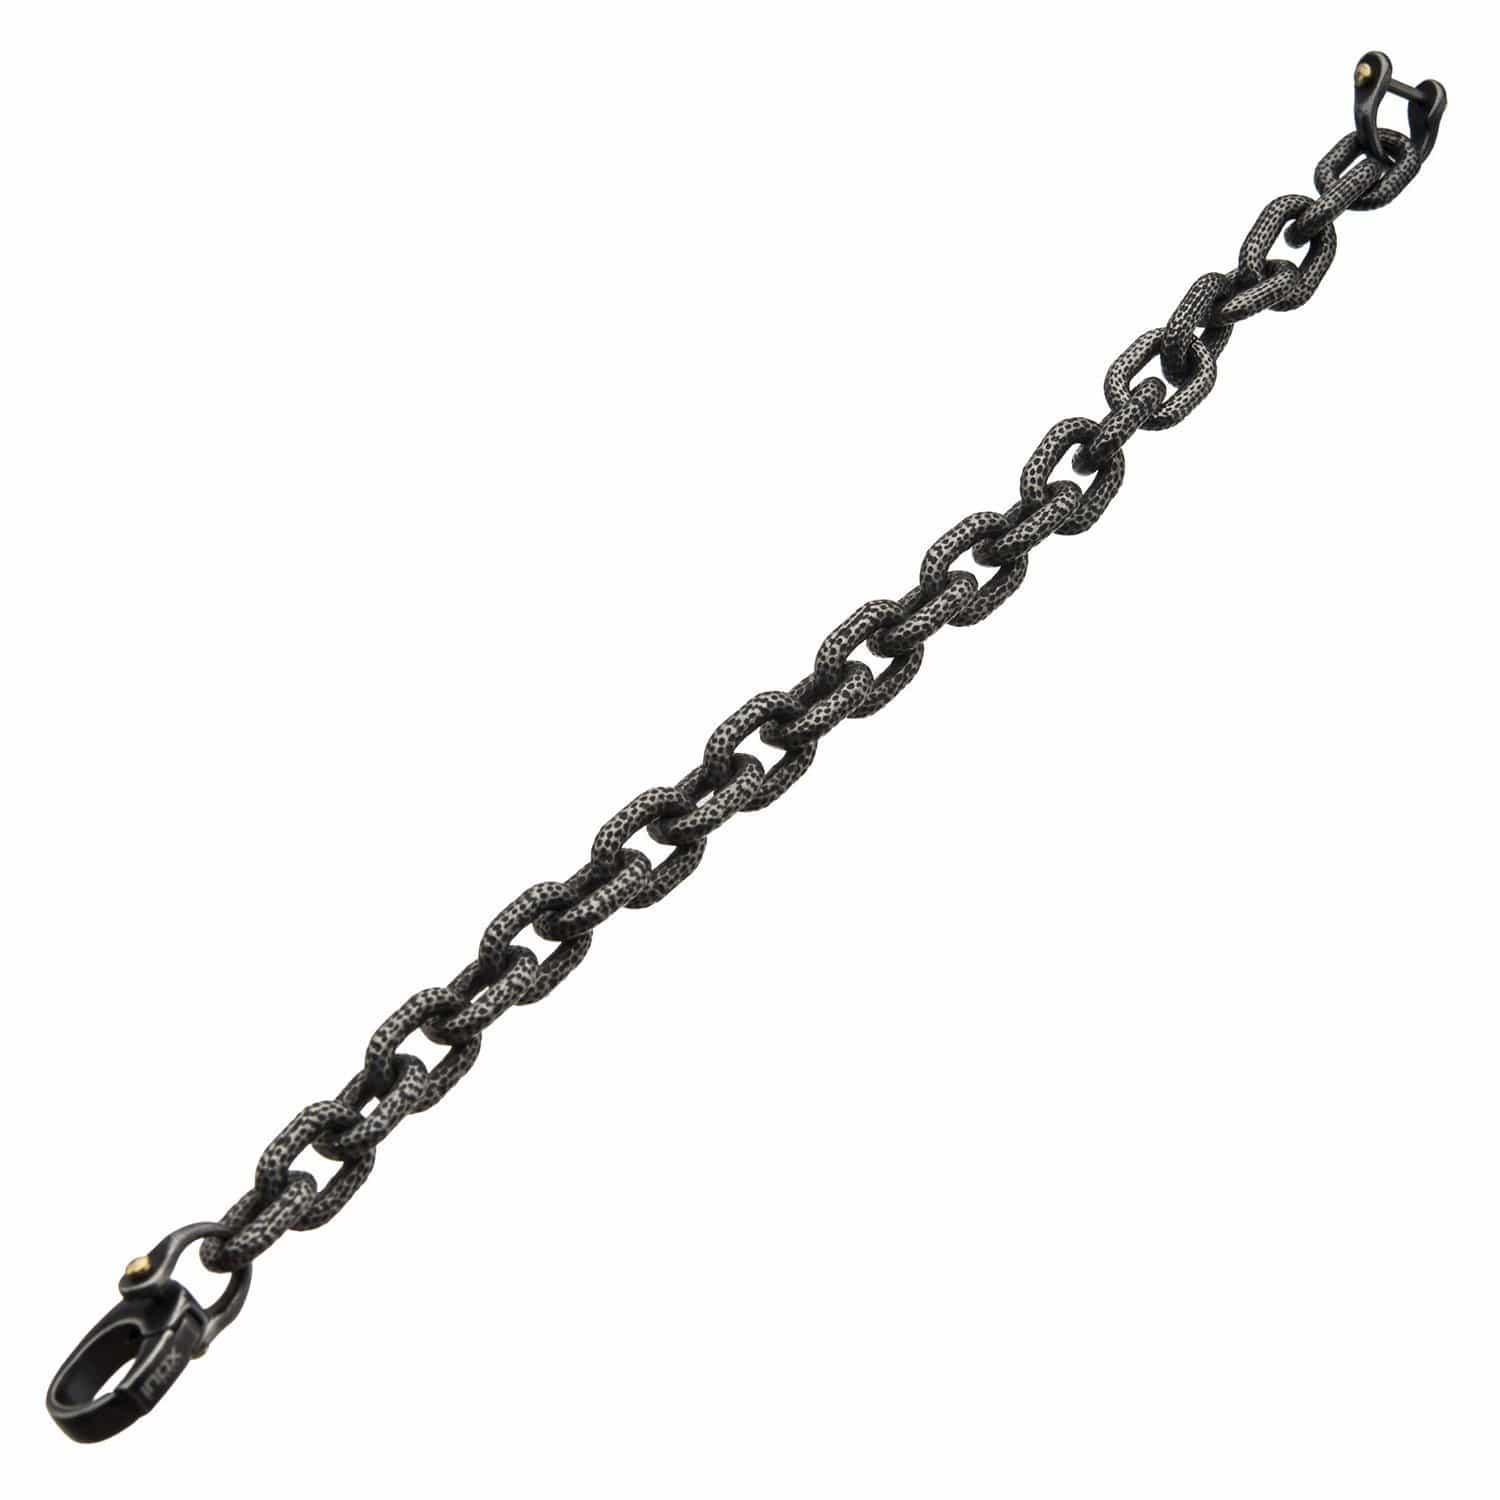 INOX JEWELRY Bracelets Antiqued Silver Tone Stainless Steel Oxidized Finish Gunmetal Large Curb Chain Bracelet BR2212